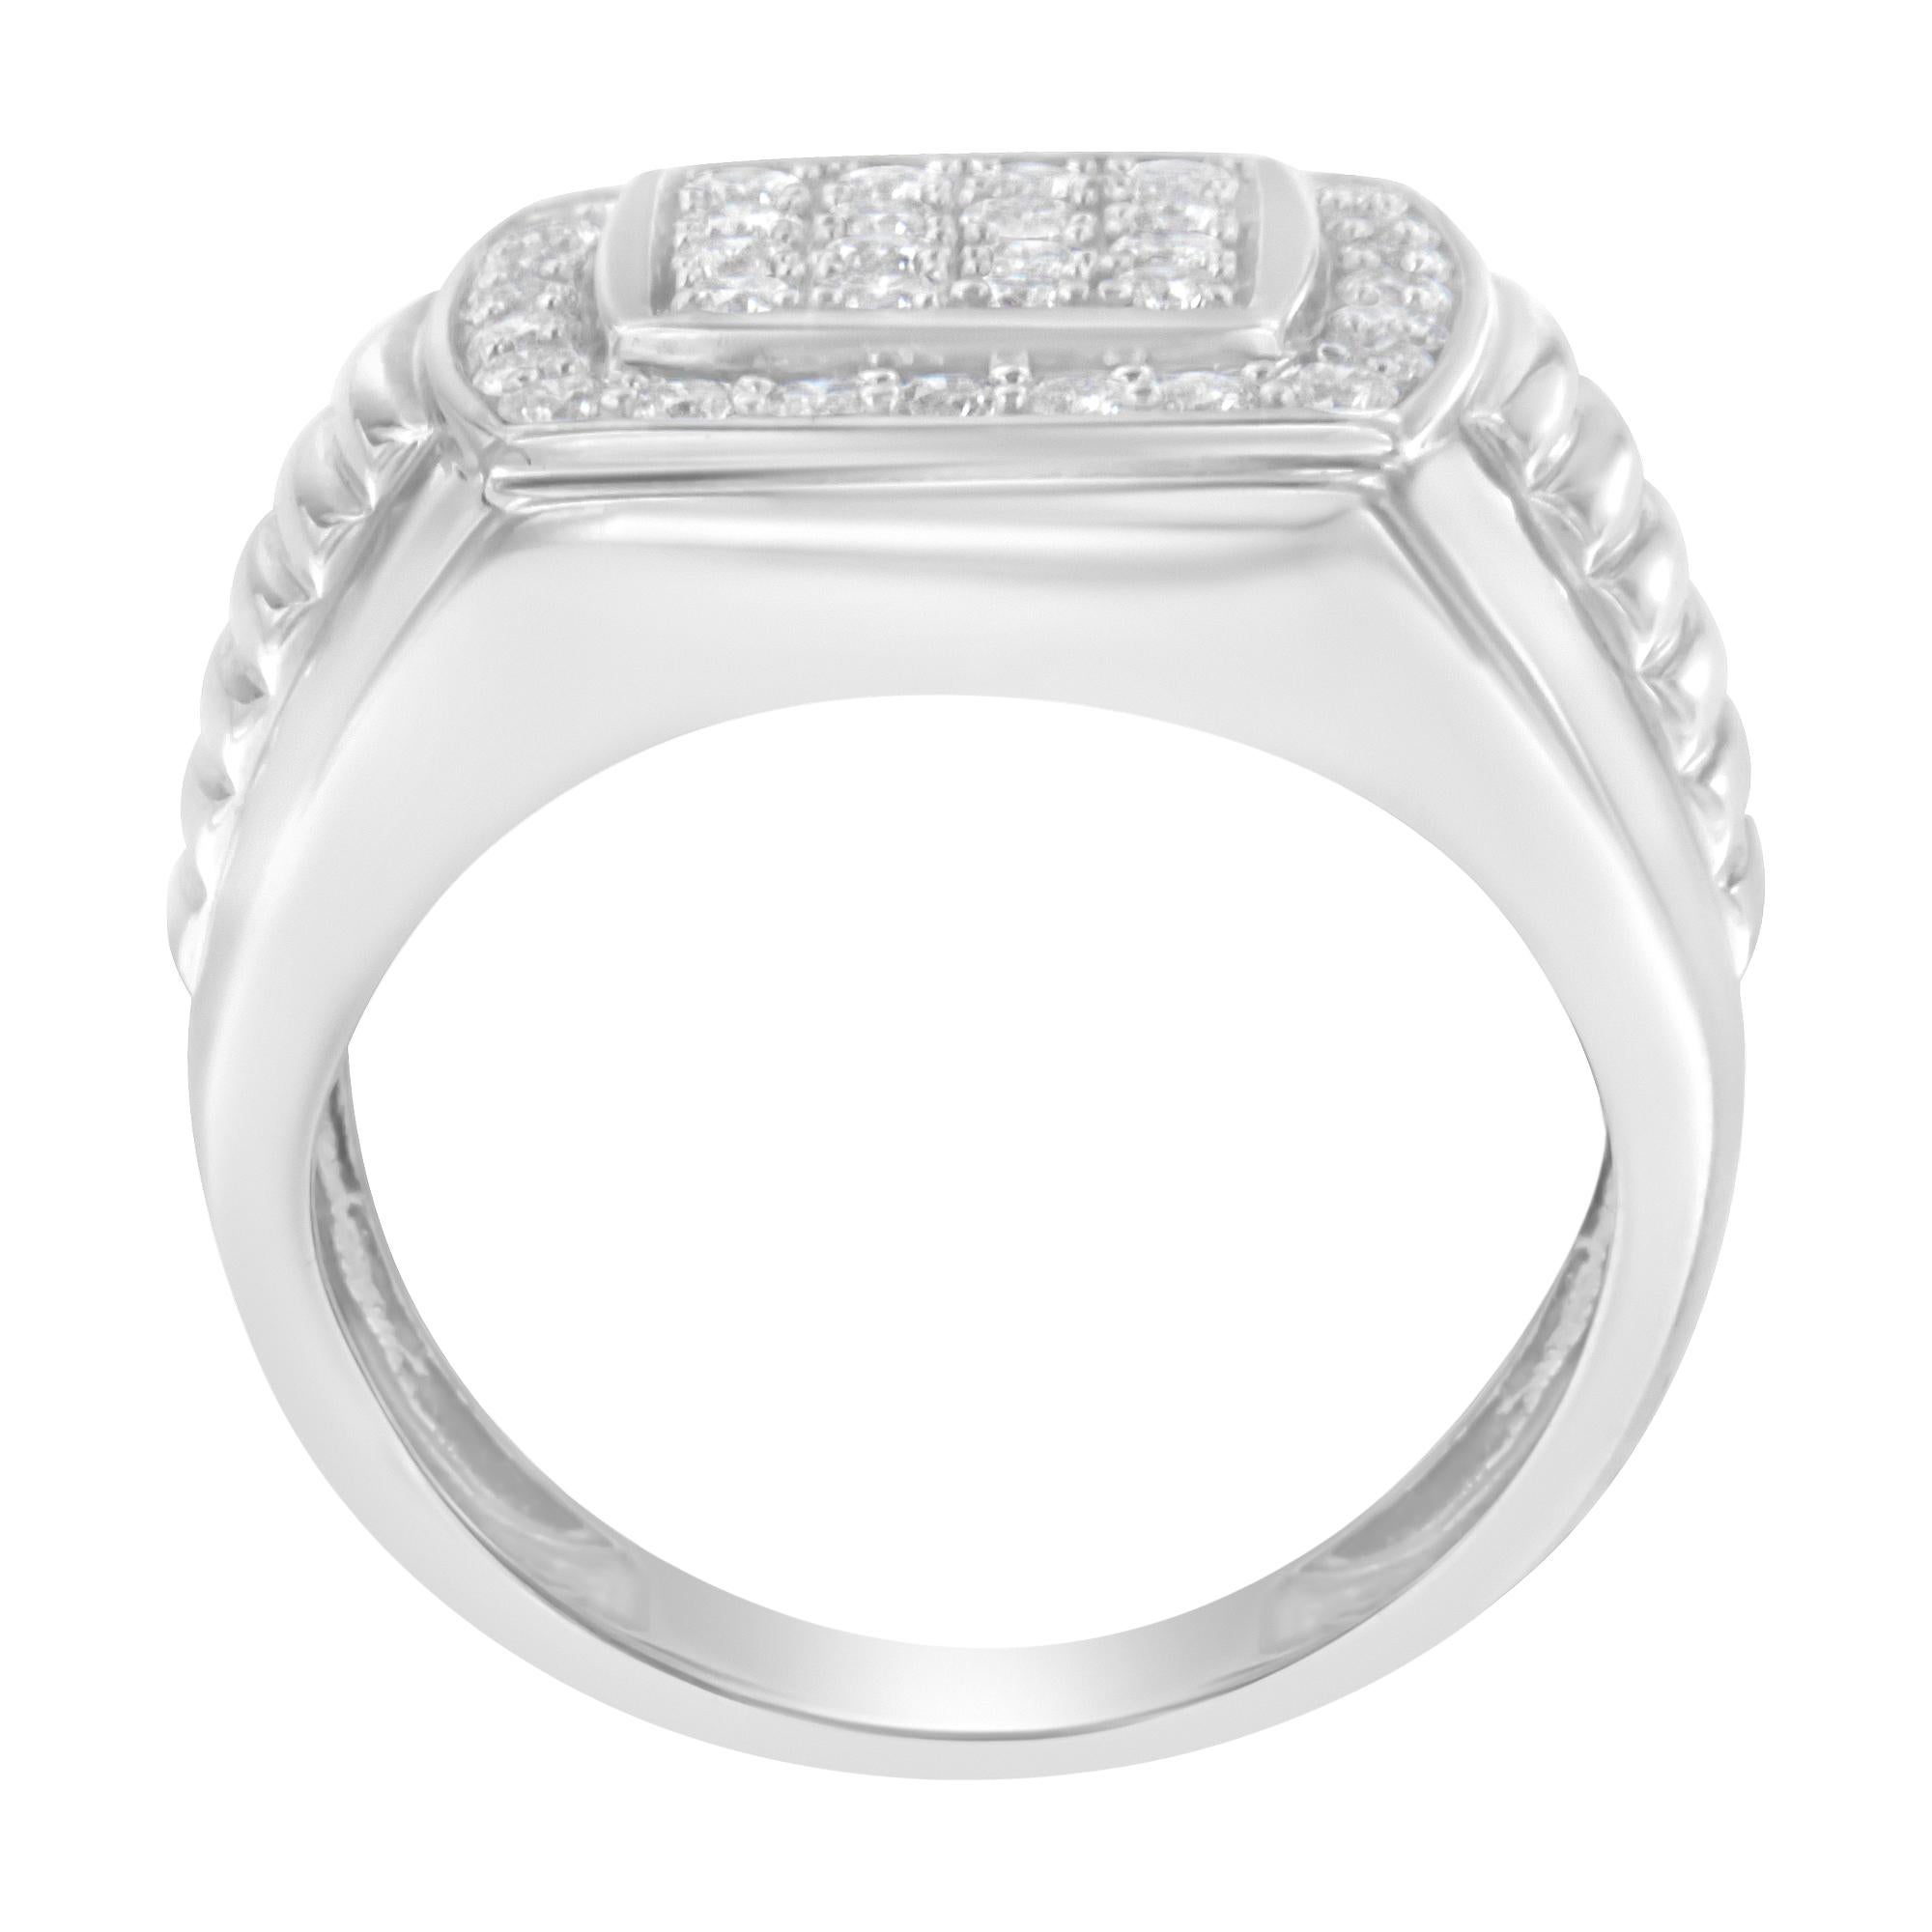 This 14 karat white gold men's band features a central square cluster of round diamonds surrounded by a squared halo of diamonds. The wide band is accented with a fluted design. It has a total diamond weight of 1 carat. Product features:
Diamond